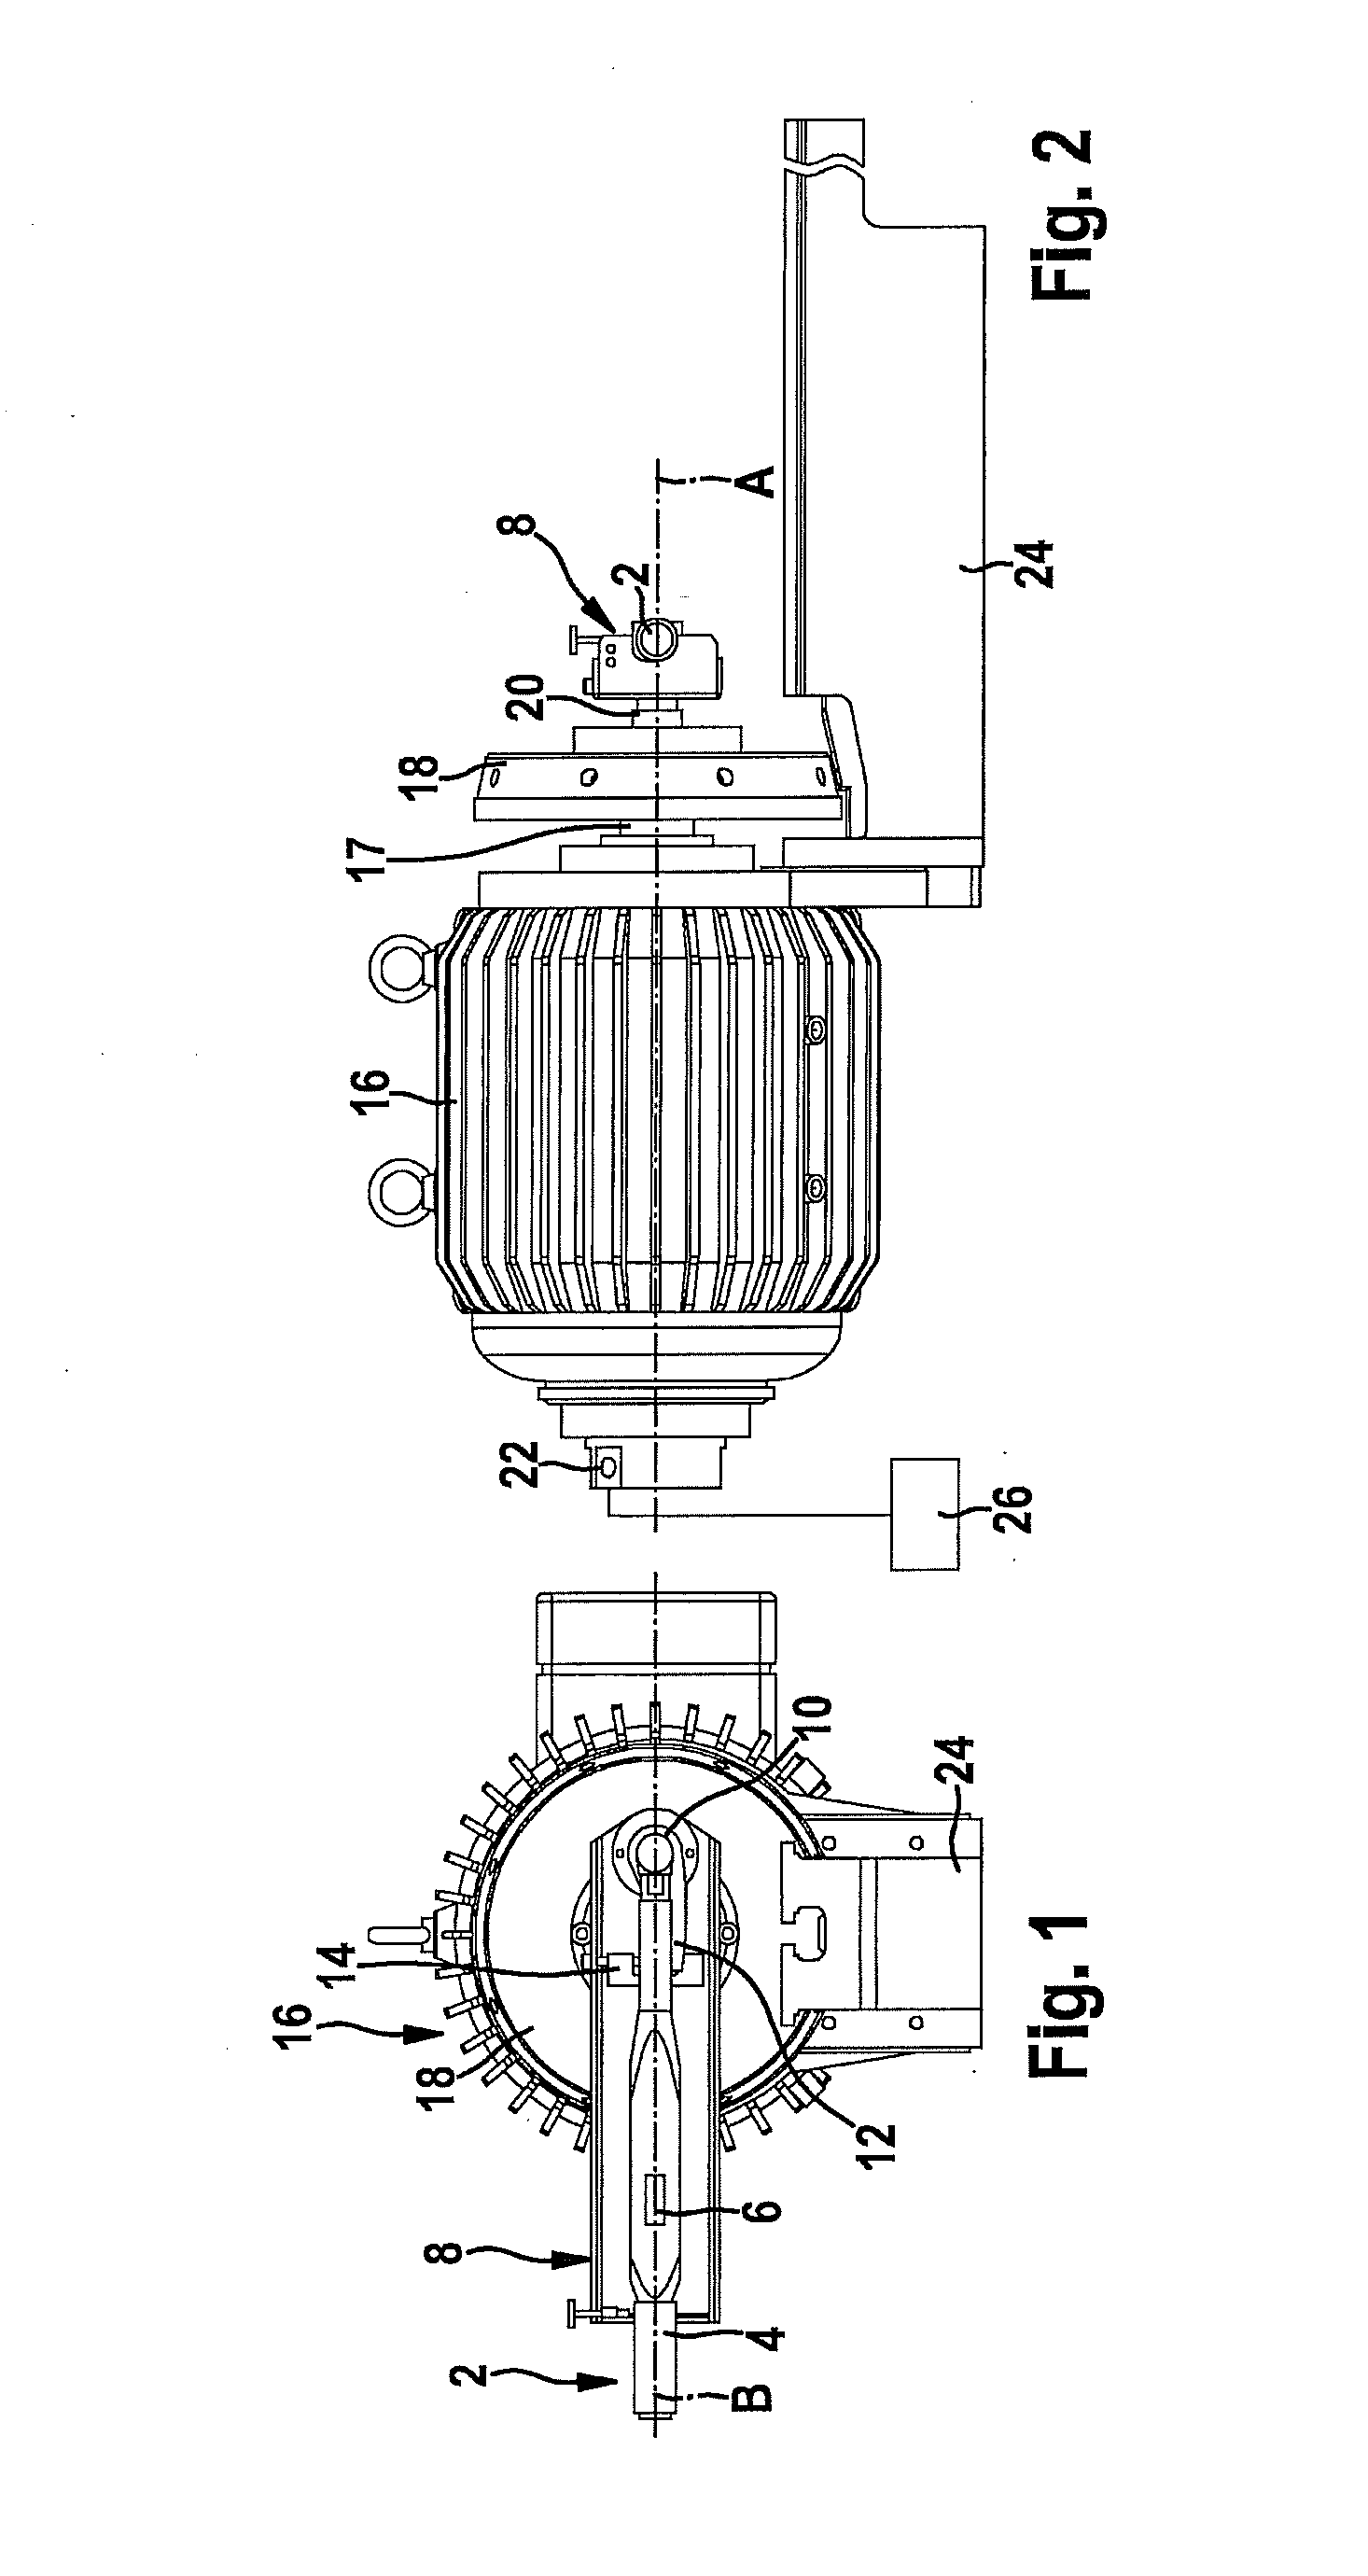 Device and method for checking an assembly wrench